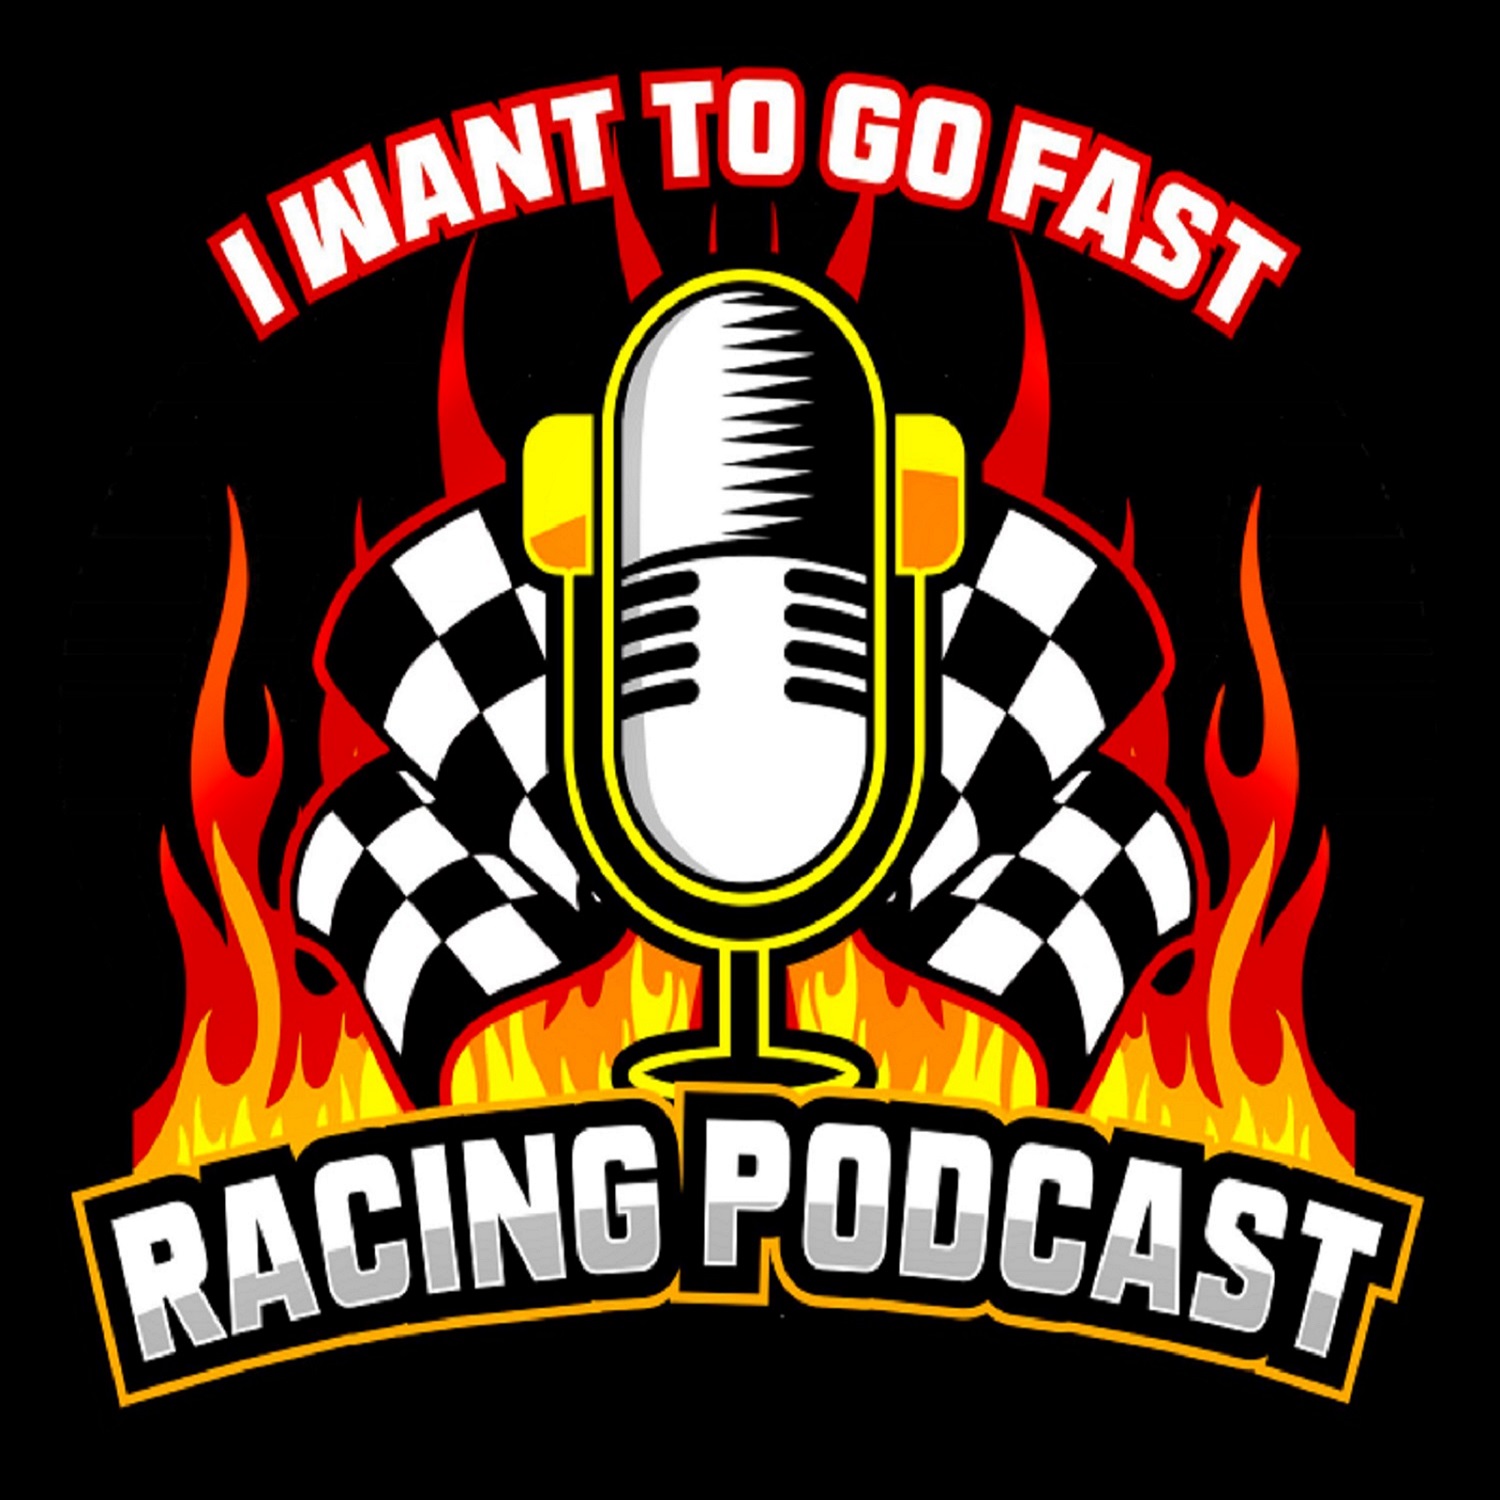 I Want to Go Fast Racing Podcast